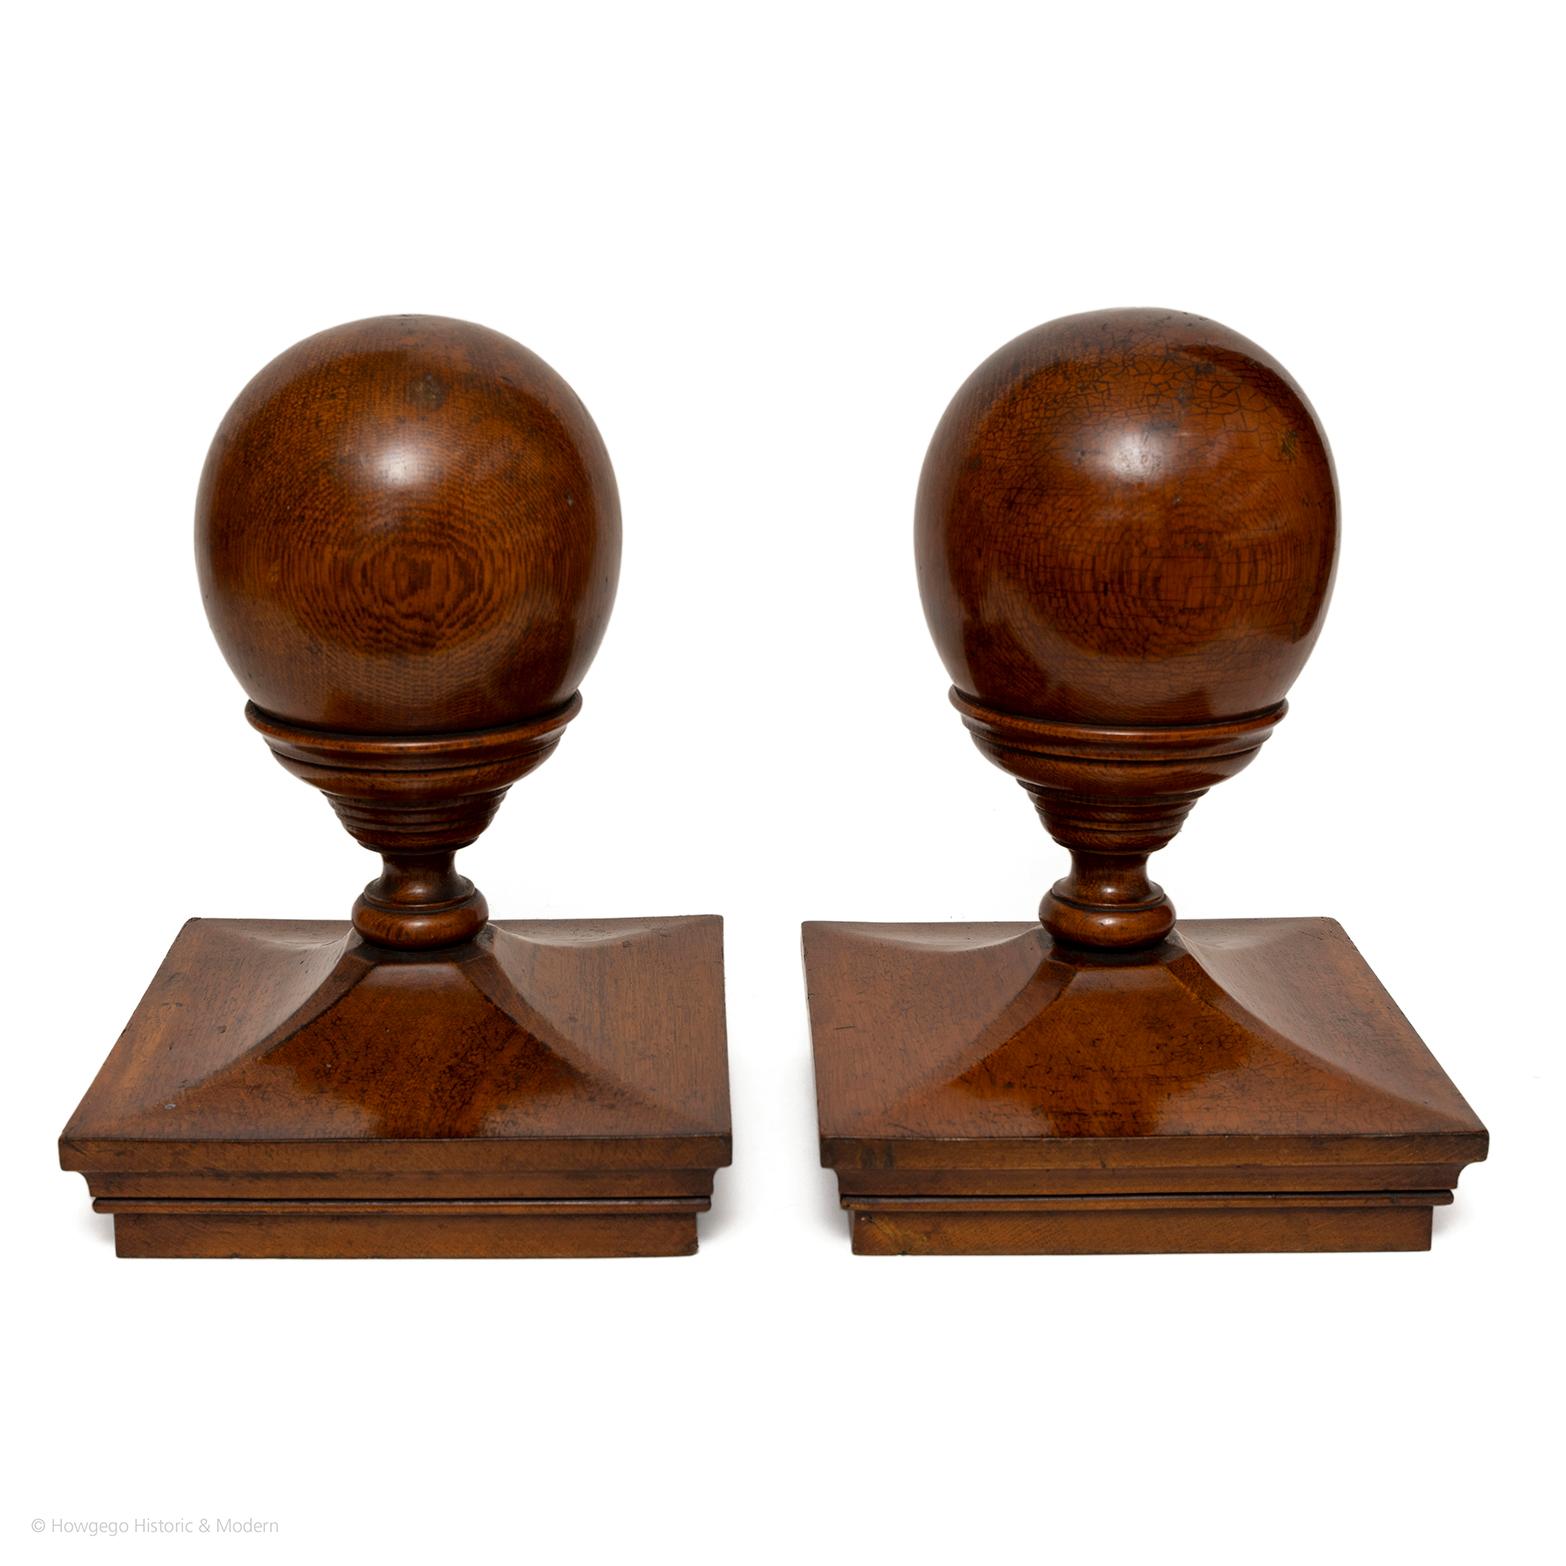 Rare pair of oak newel post cappings or finials
Elegant and finely turned ball supported cup sweeping into deep moulded base
Made from high quality oak with fine figuring
Original lustrous patina
Could be repurposed as decorative objects or